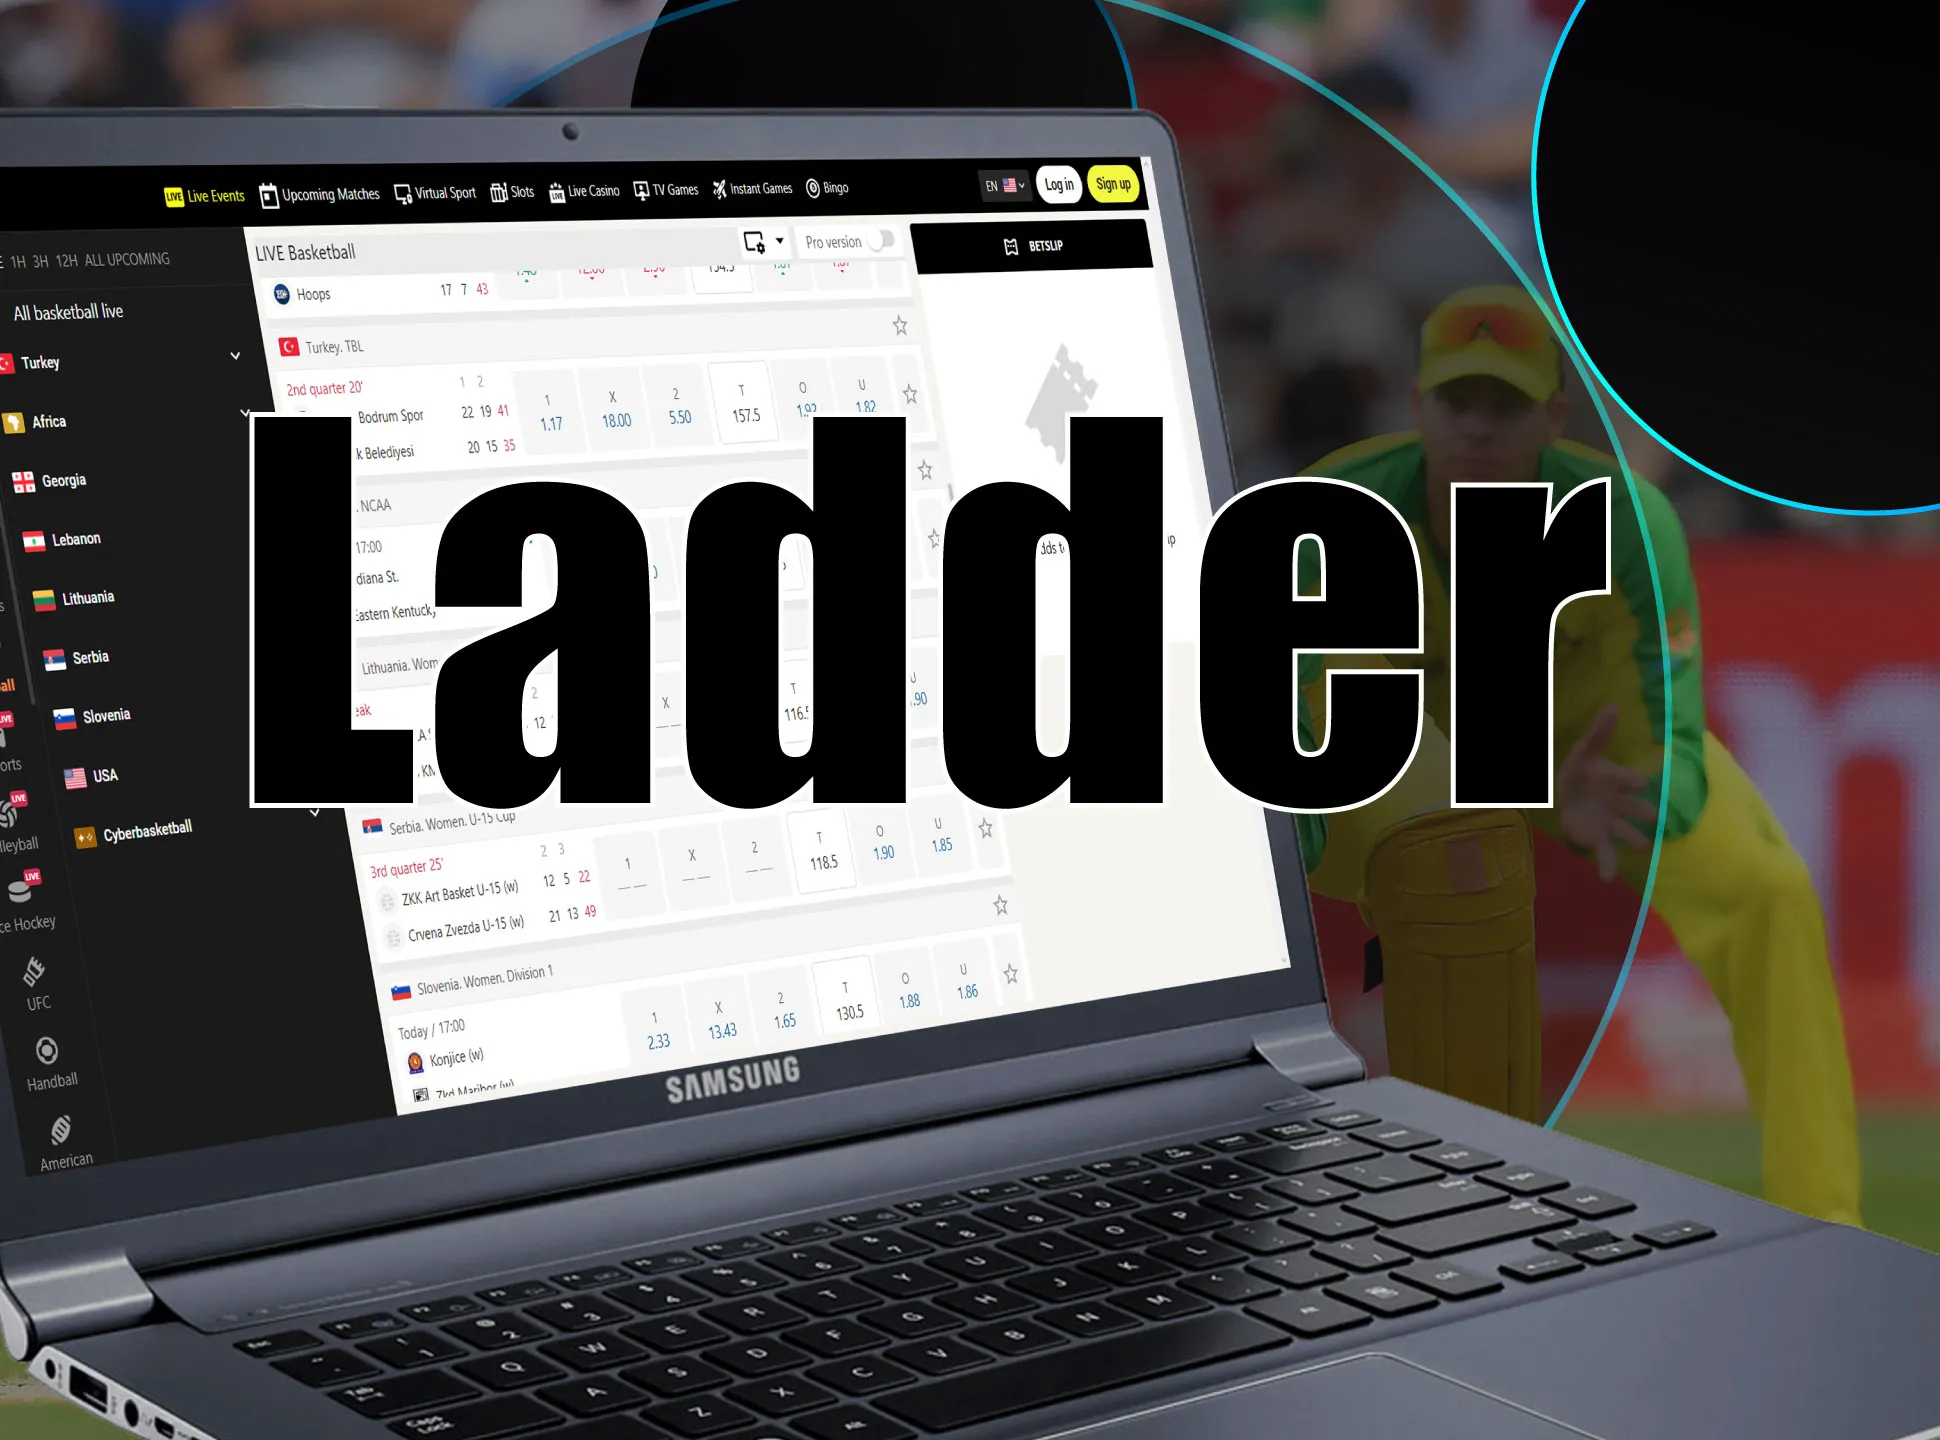 Experienced bettors can use a ladder strategy and always place the maximum amount of money.